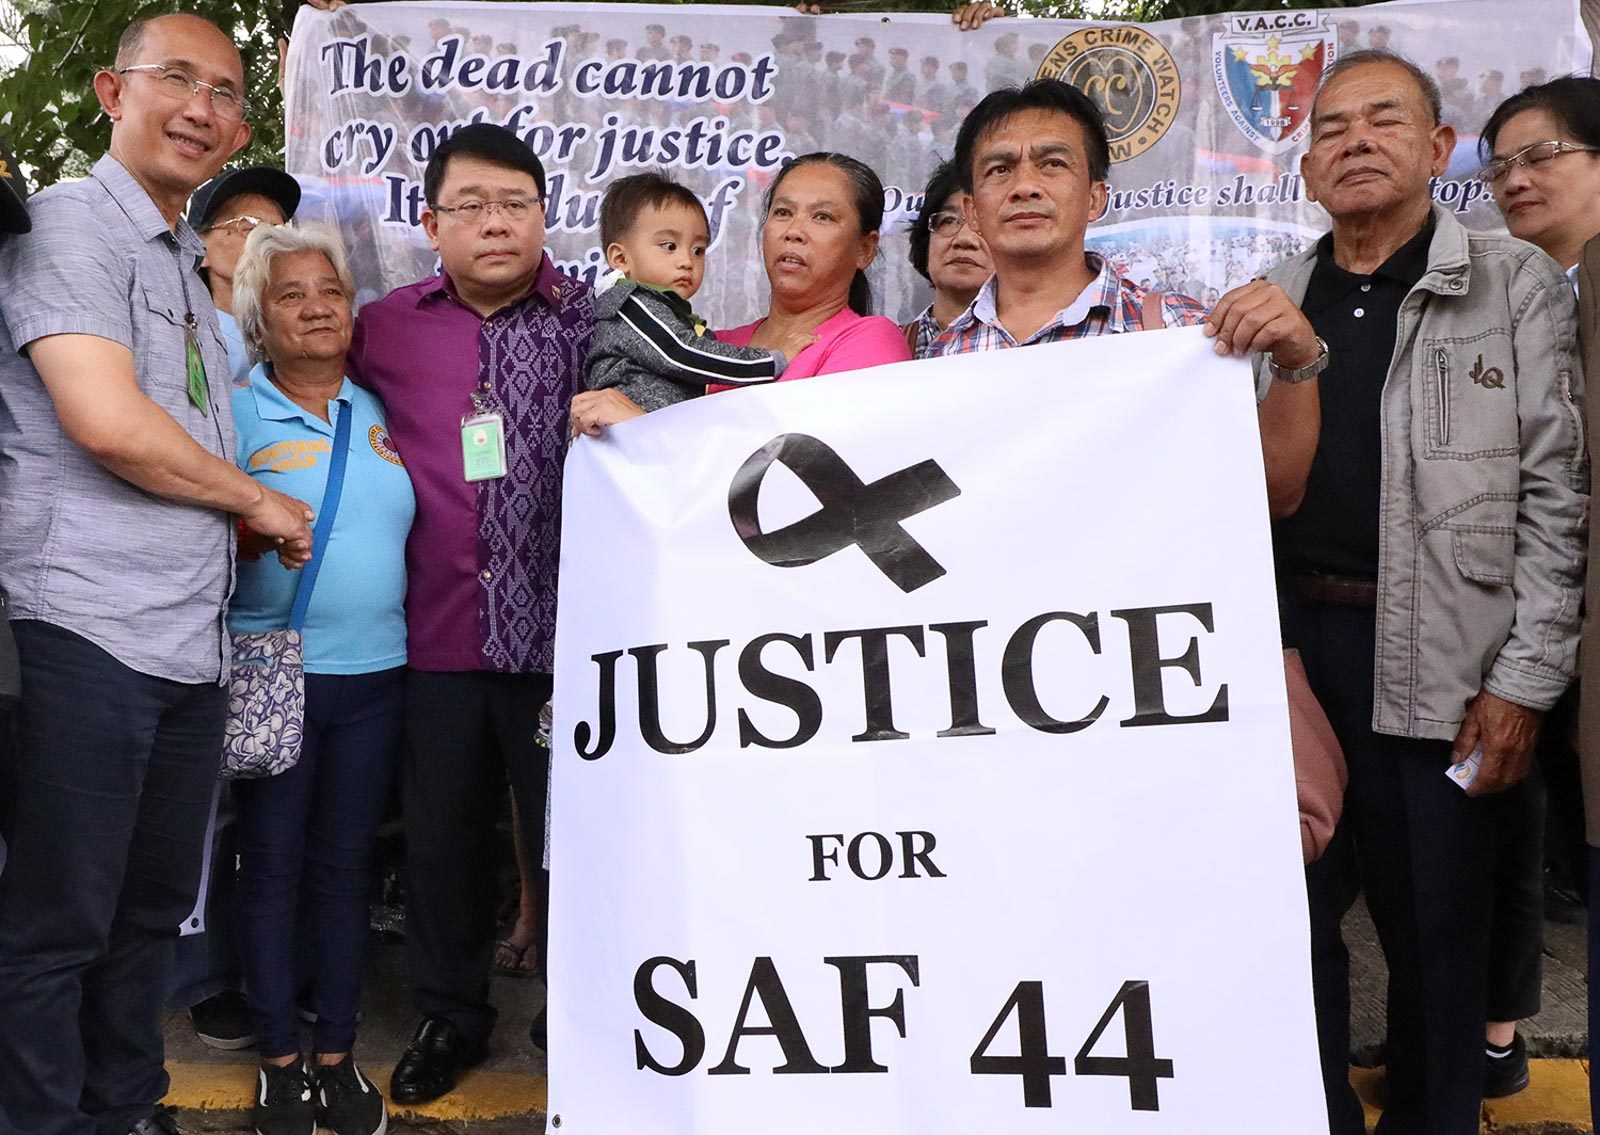 Using Magalong, VACC tries to reopen Mamasapano homicide case vs Aquino